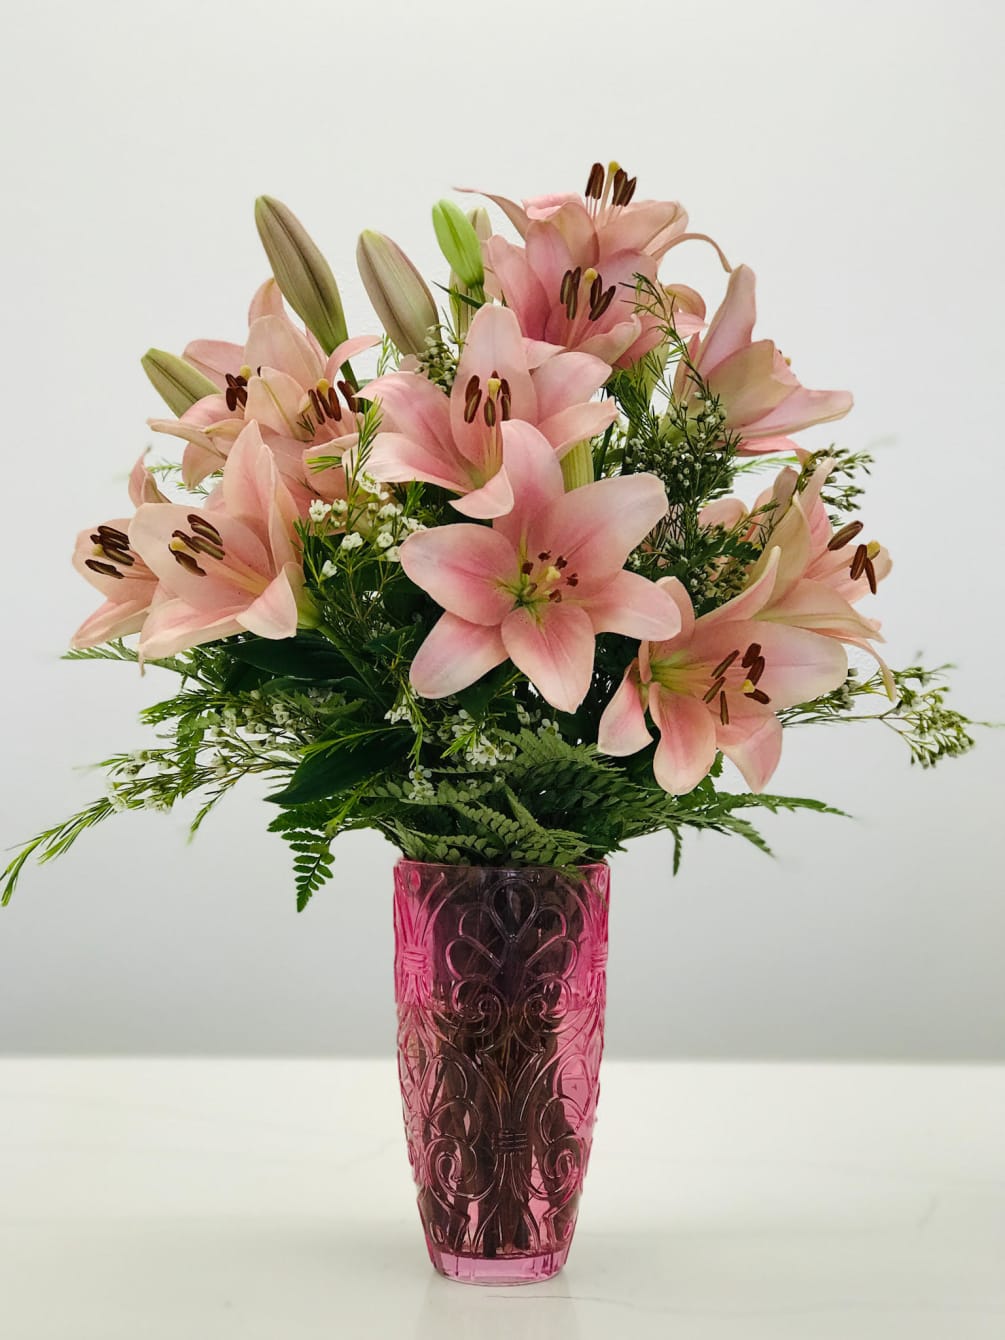 Drink in the color these delicious full-brimmed, full-blooming lilies are offering 